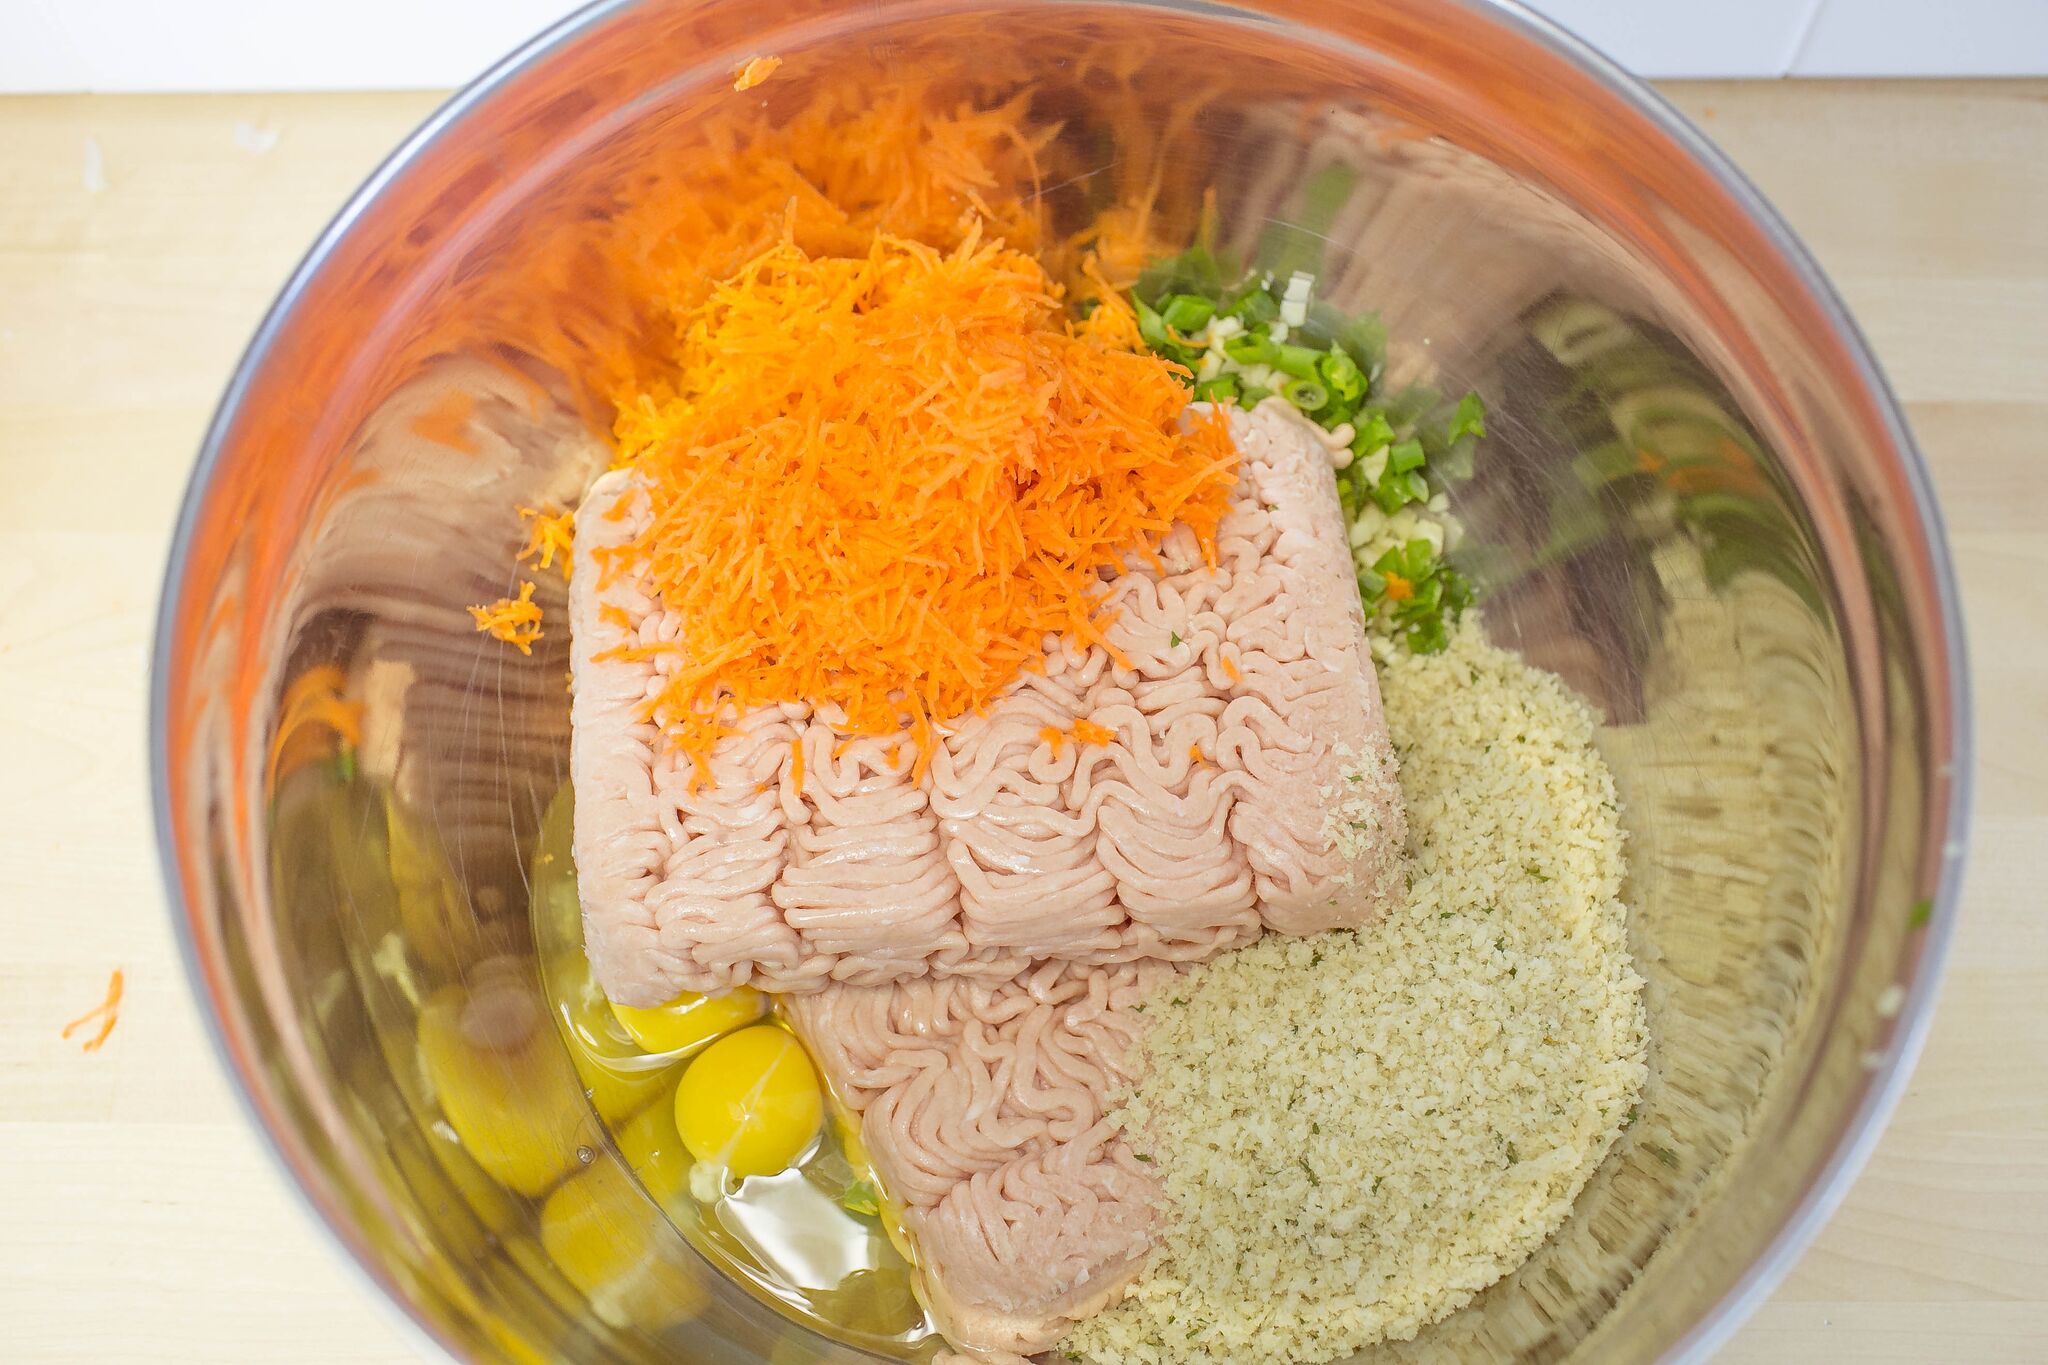 In a large bowl, mix together green onions, garlic, carrots, eggs, and panko into chopped meat.